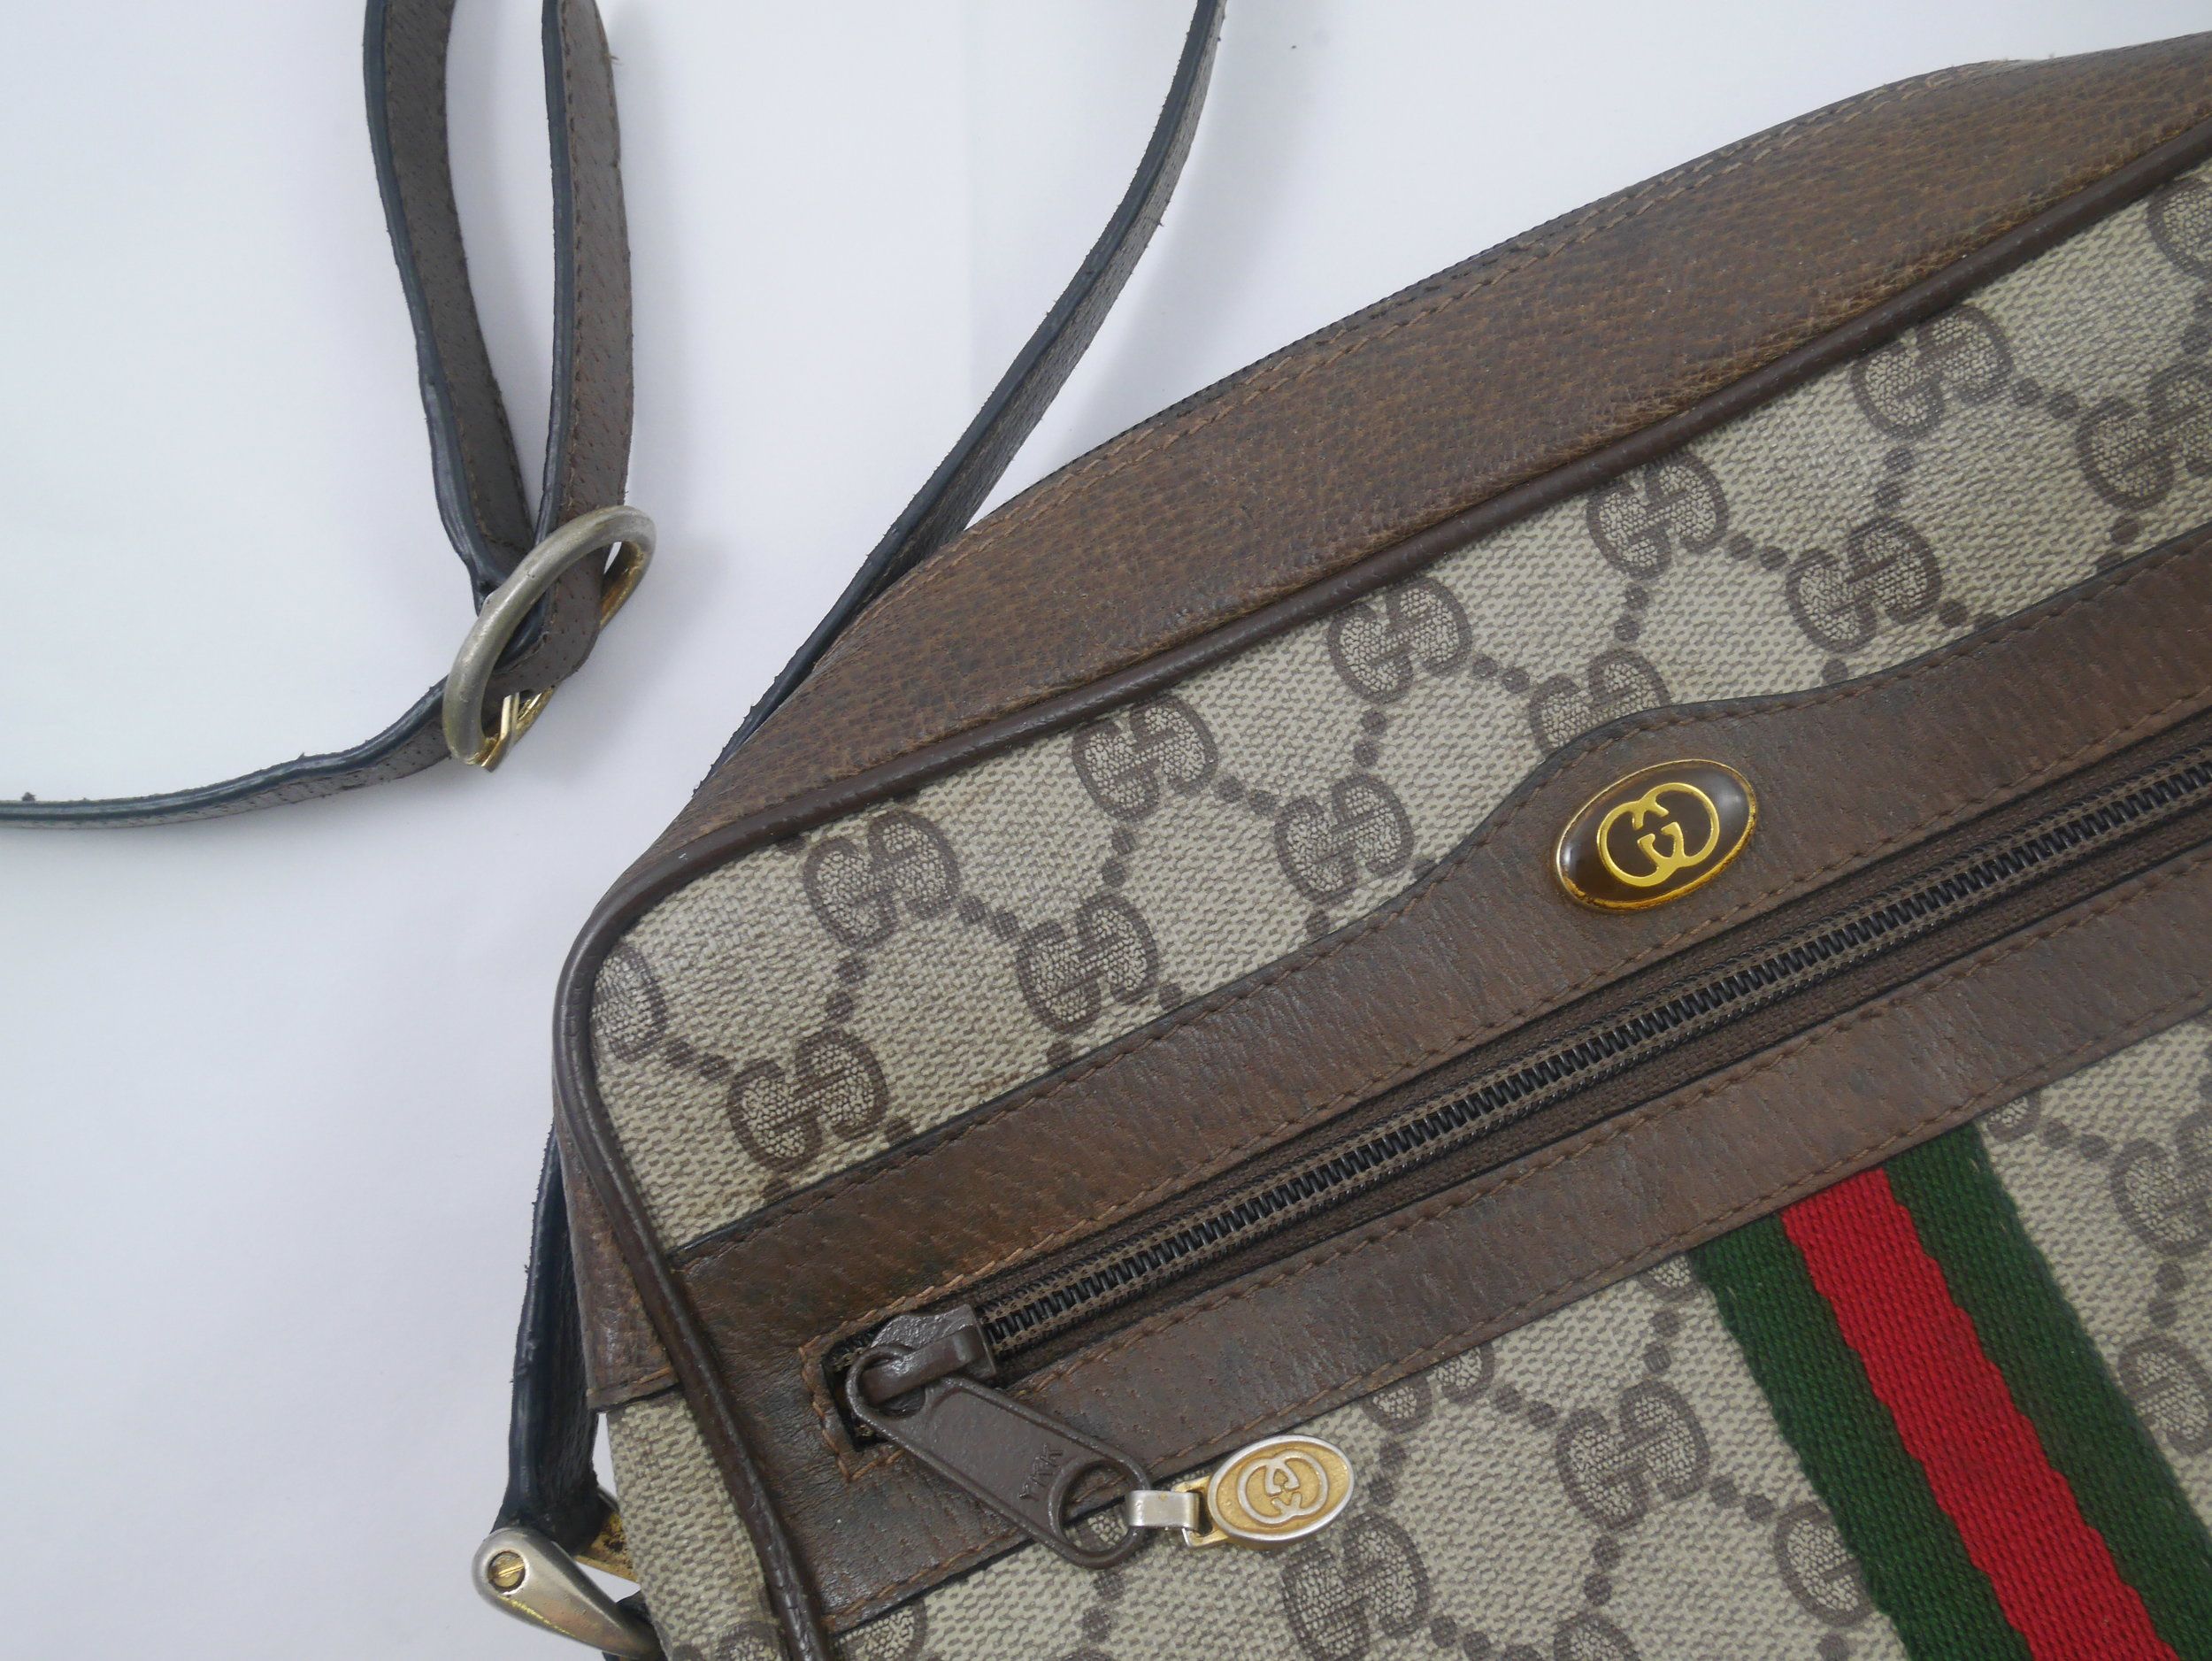 Reviving Vintage Gucci - Aftercare for Luxury Fashion - The Restory